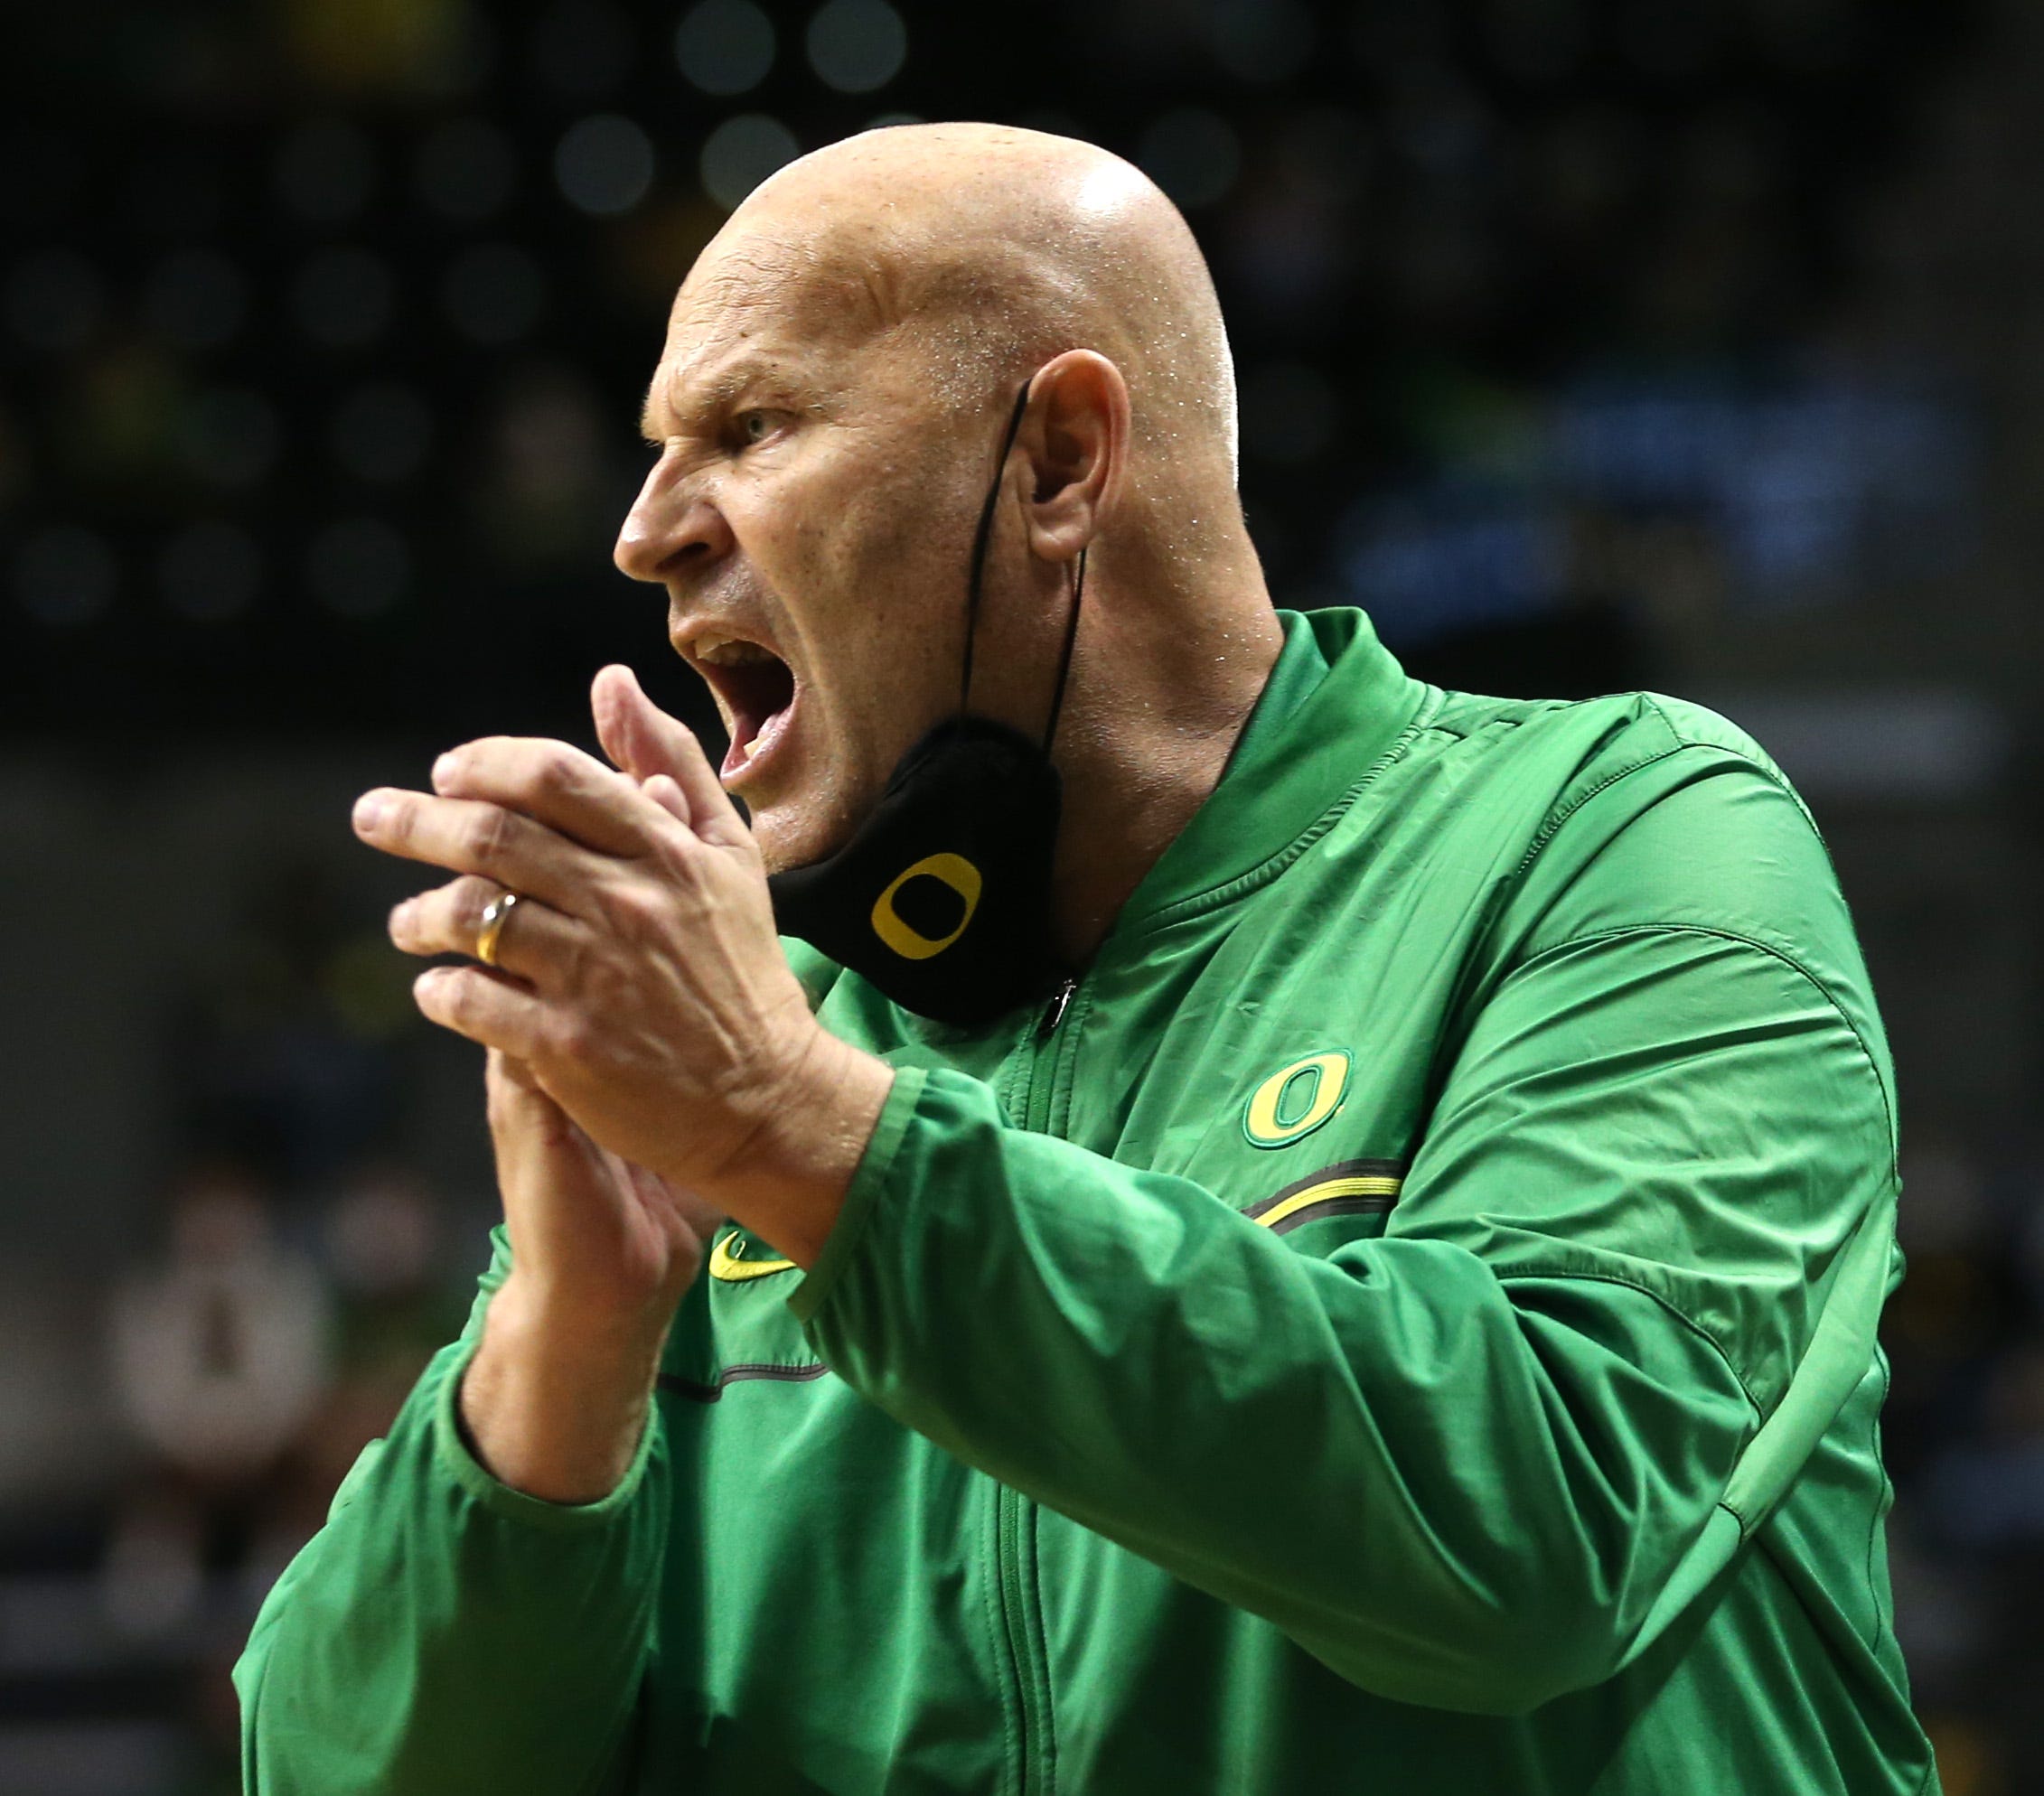 Watch: Oregon coach Kelly Graves after the Ducks 72-59 victory against No. 9 UConn